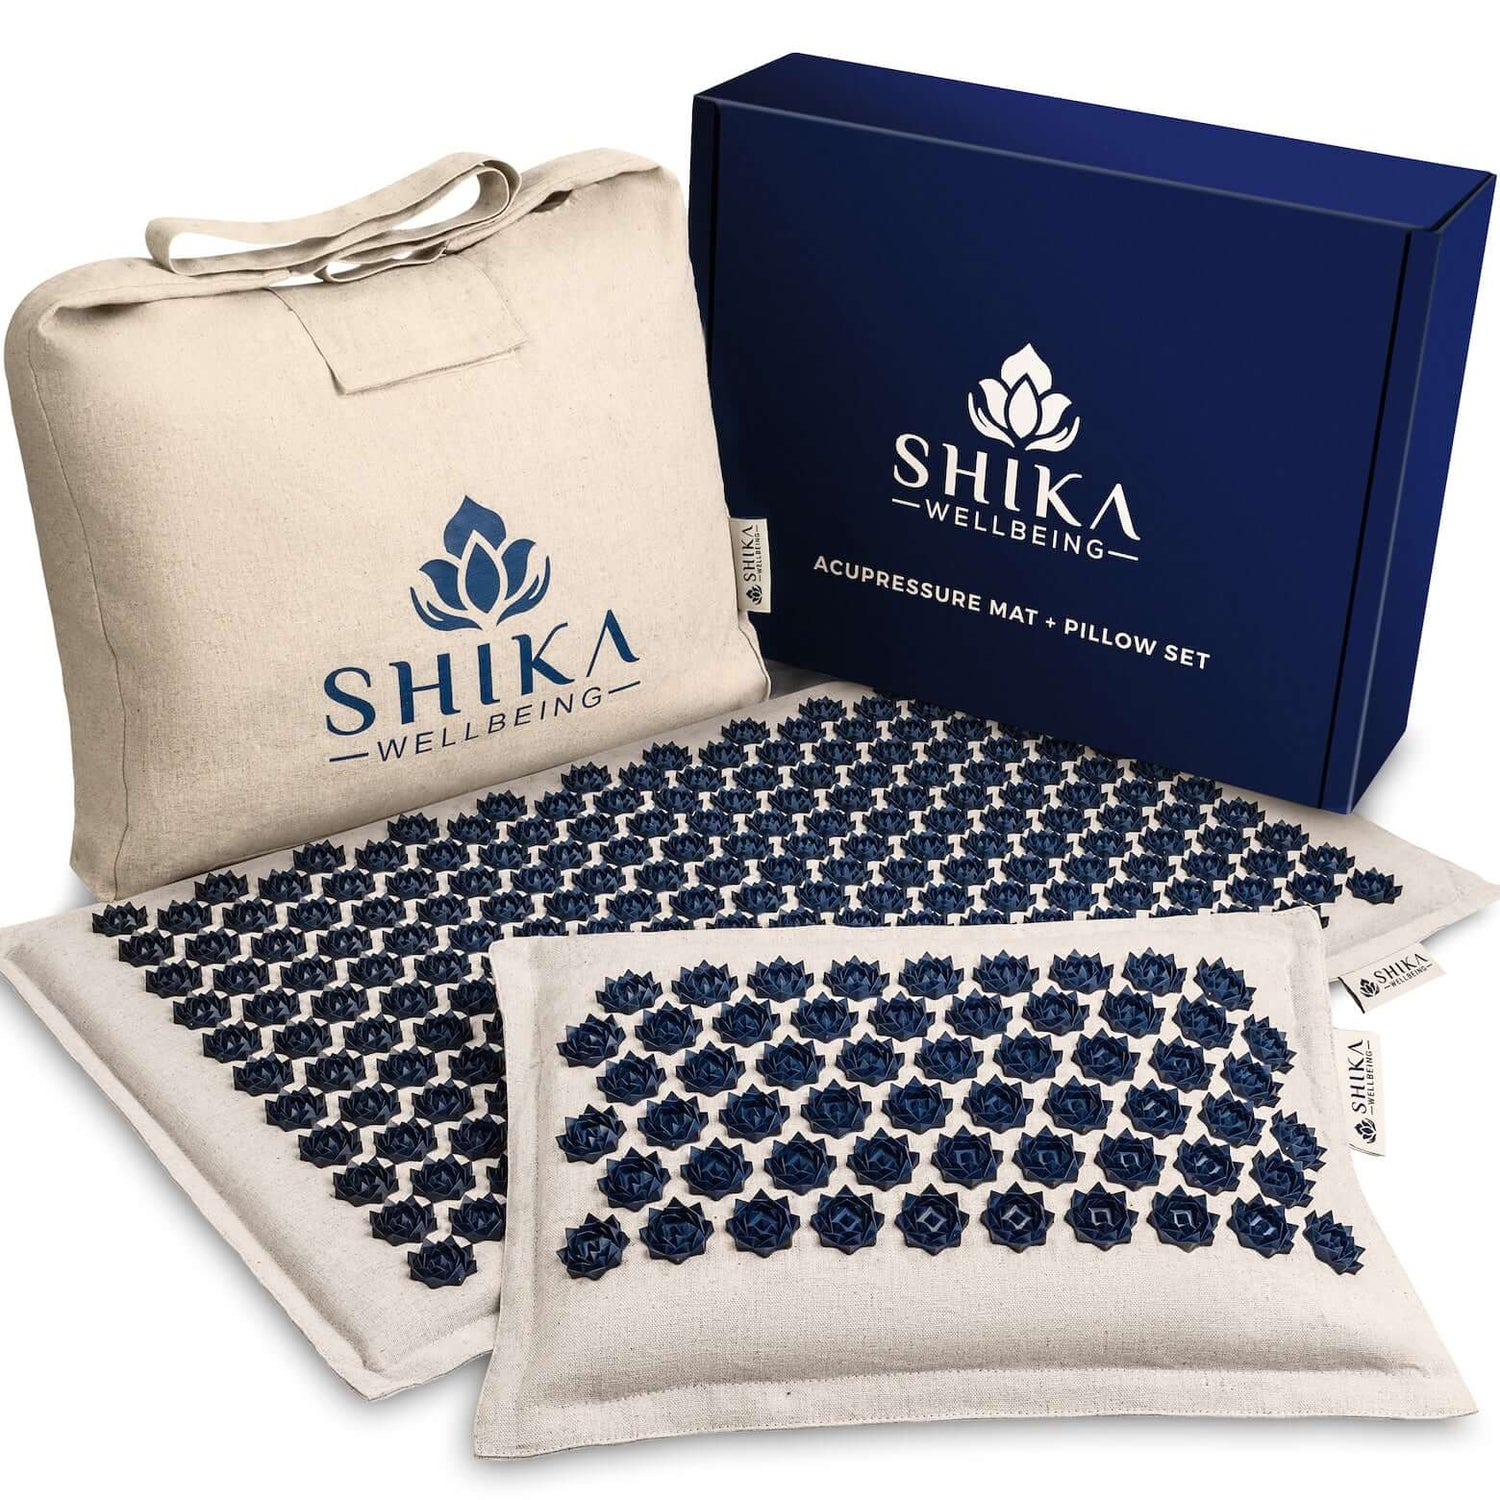 Premium Shika Acupressure mat and pillow set in a gift box wioth lavender infused inside pillow to enhance your relaxation journey